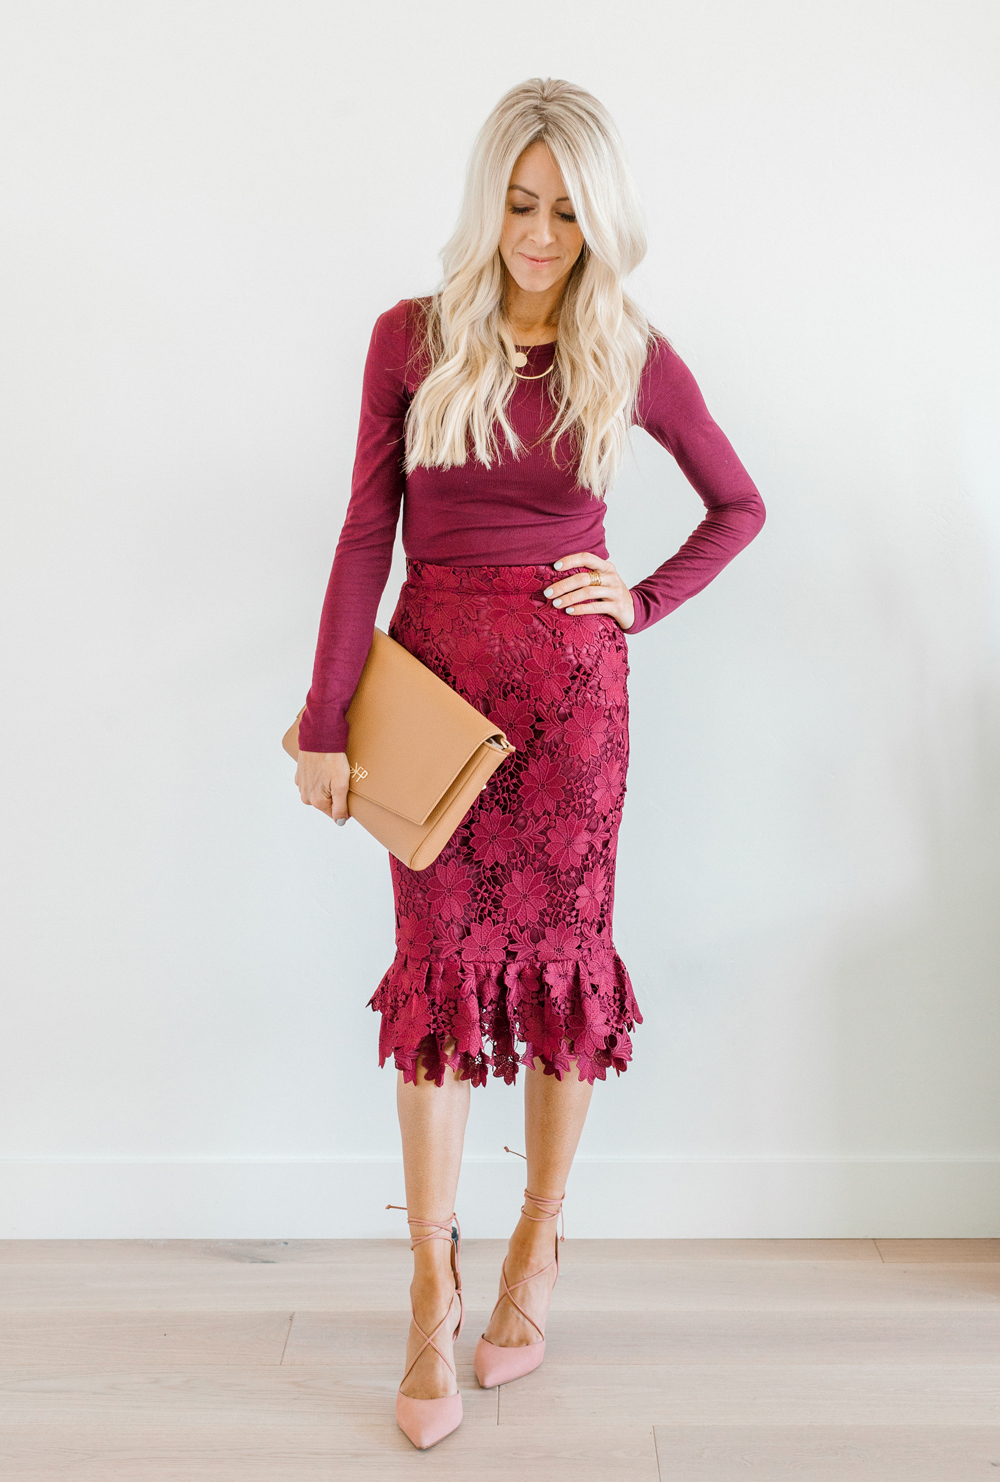 Kailee Wright holiday dresses rachel parcell skirt